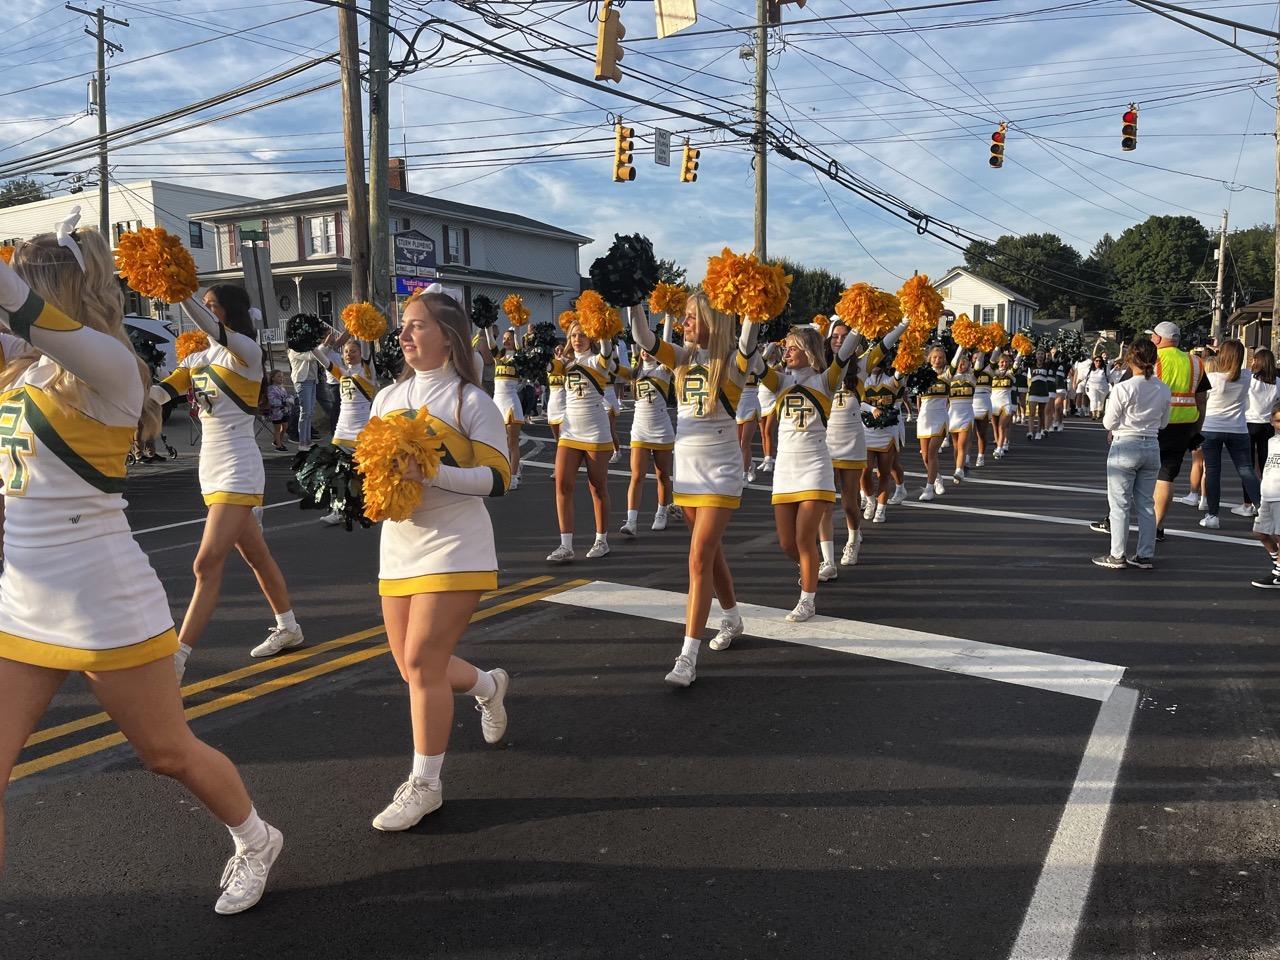 The cheerleaders participated in the parade